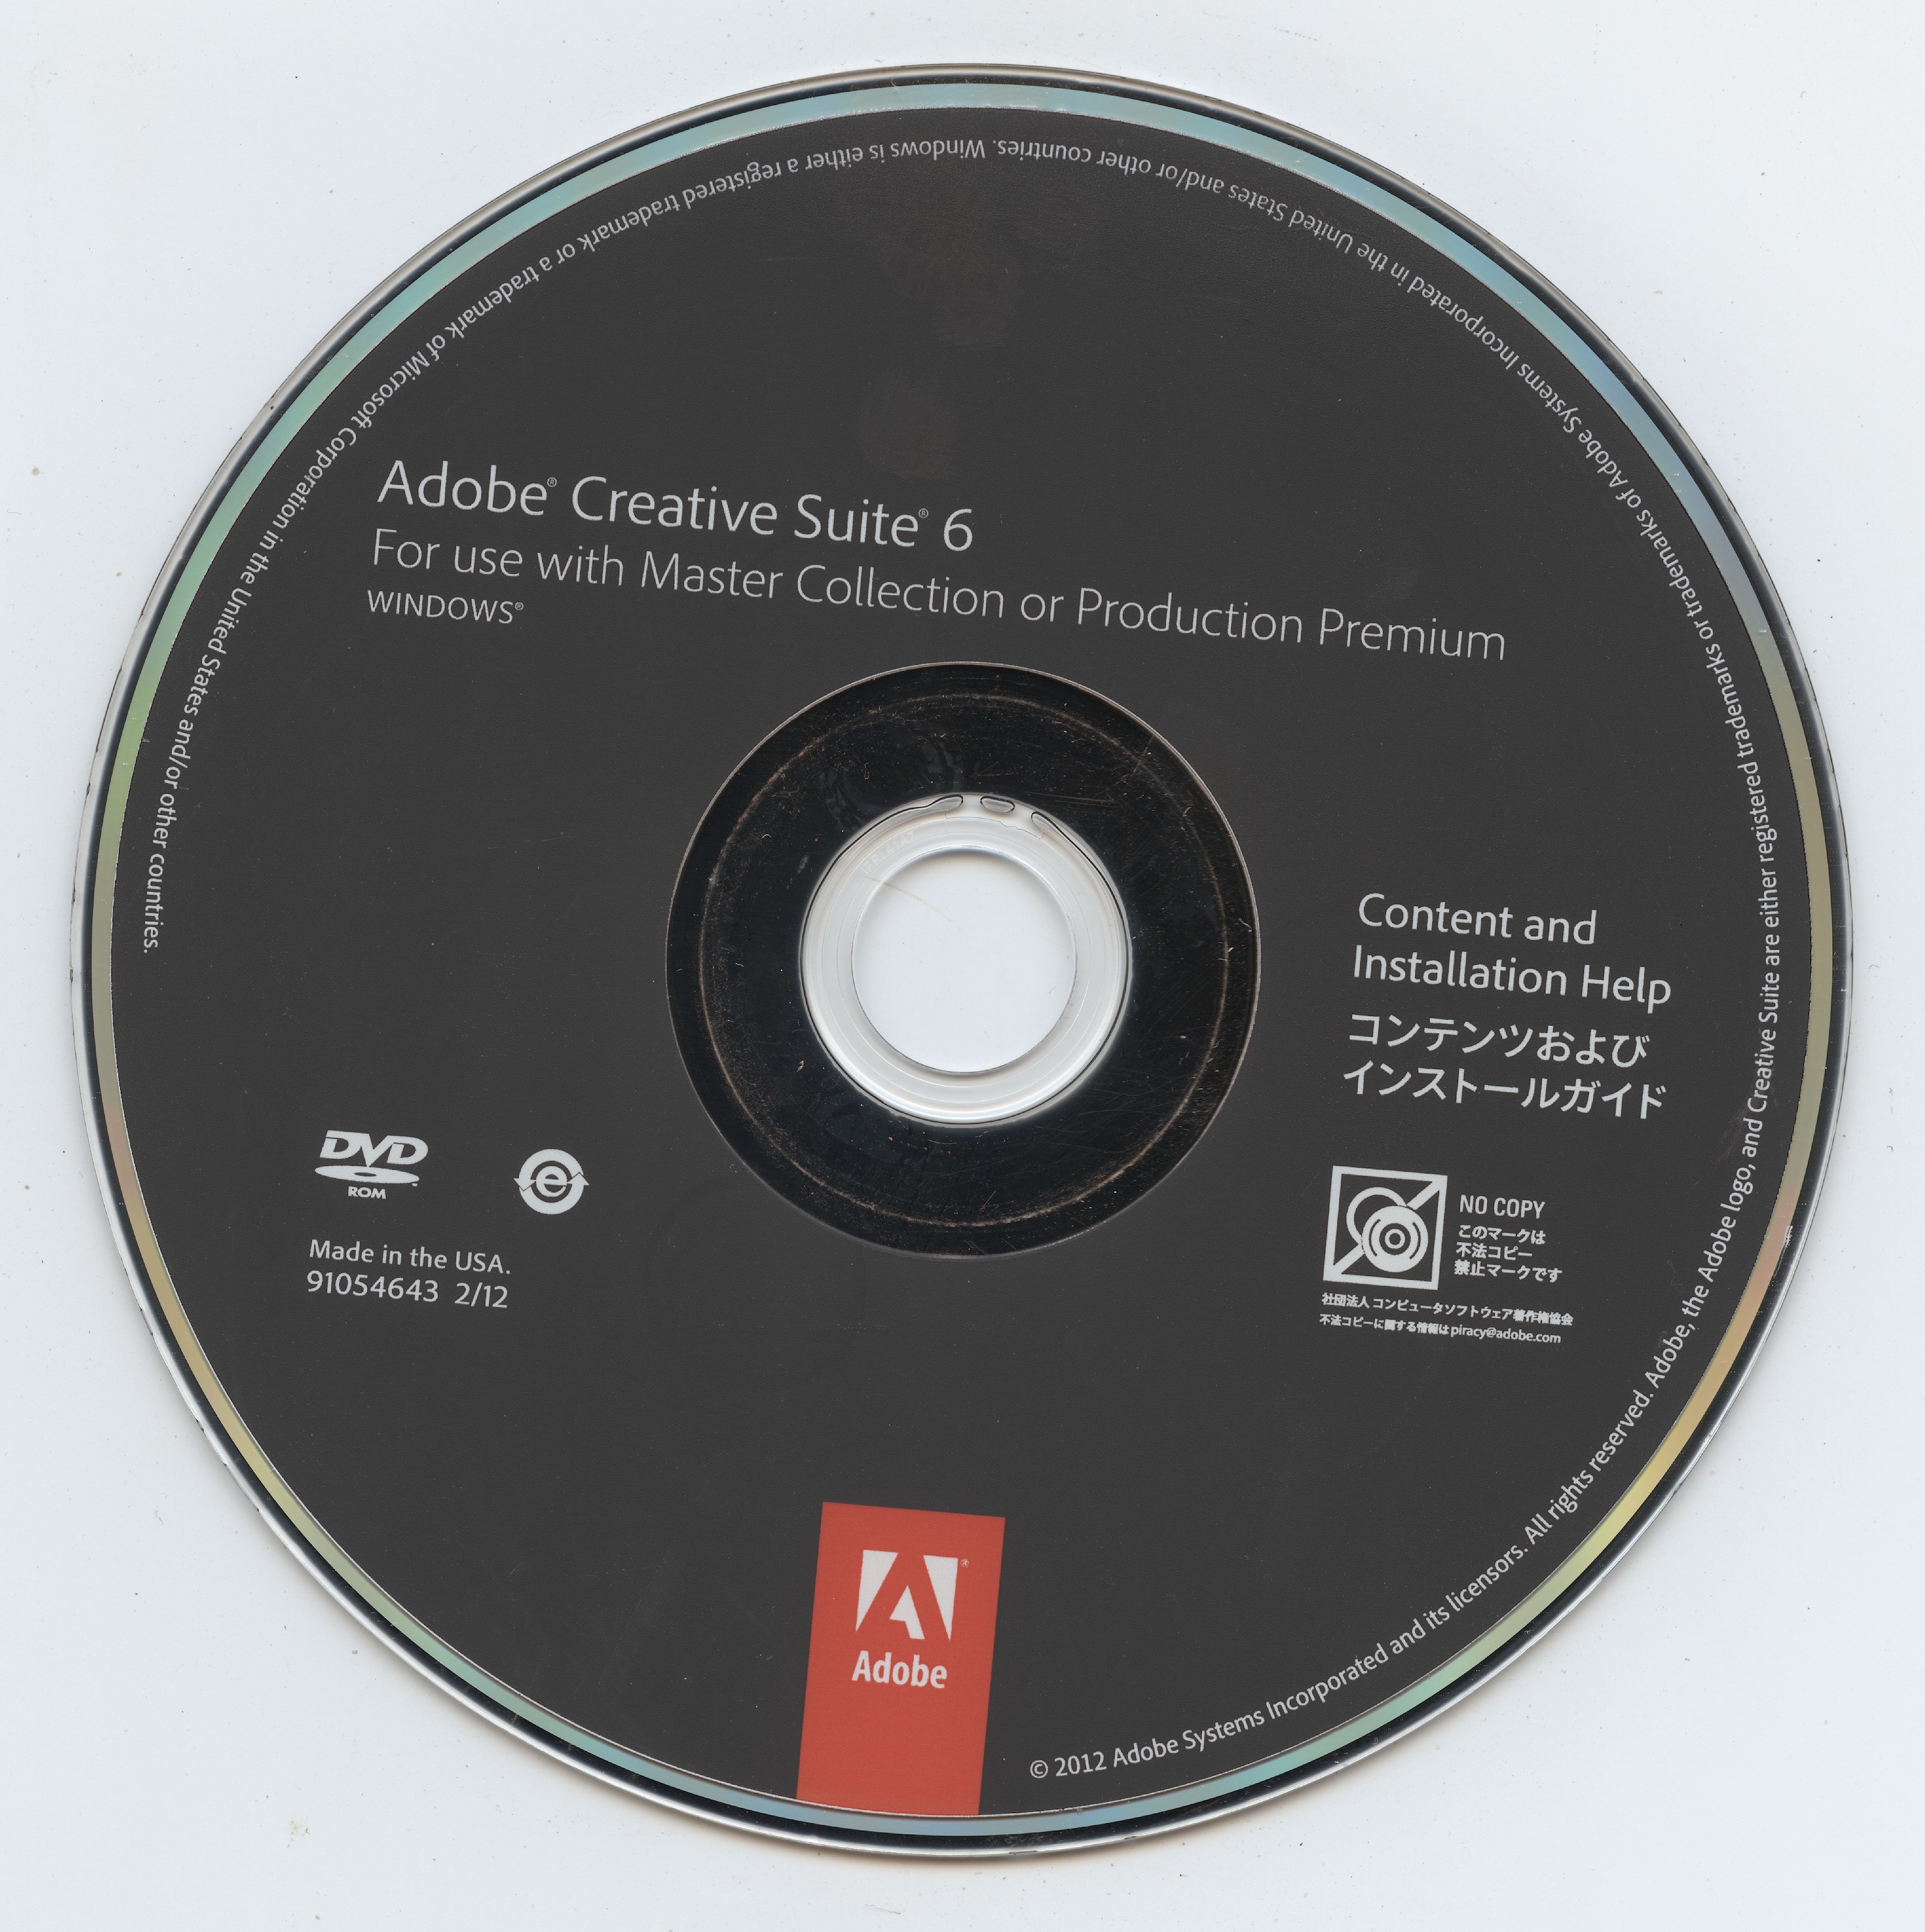 Adobe Creative Suite 6 for Windows Content and Installation Help 